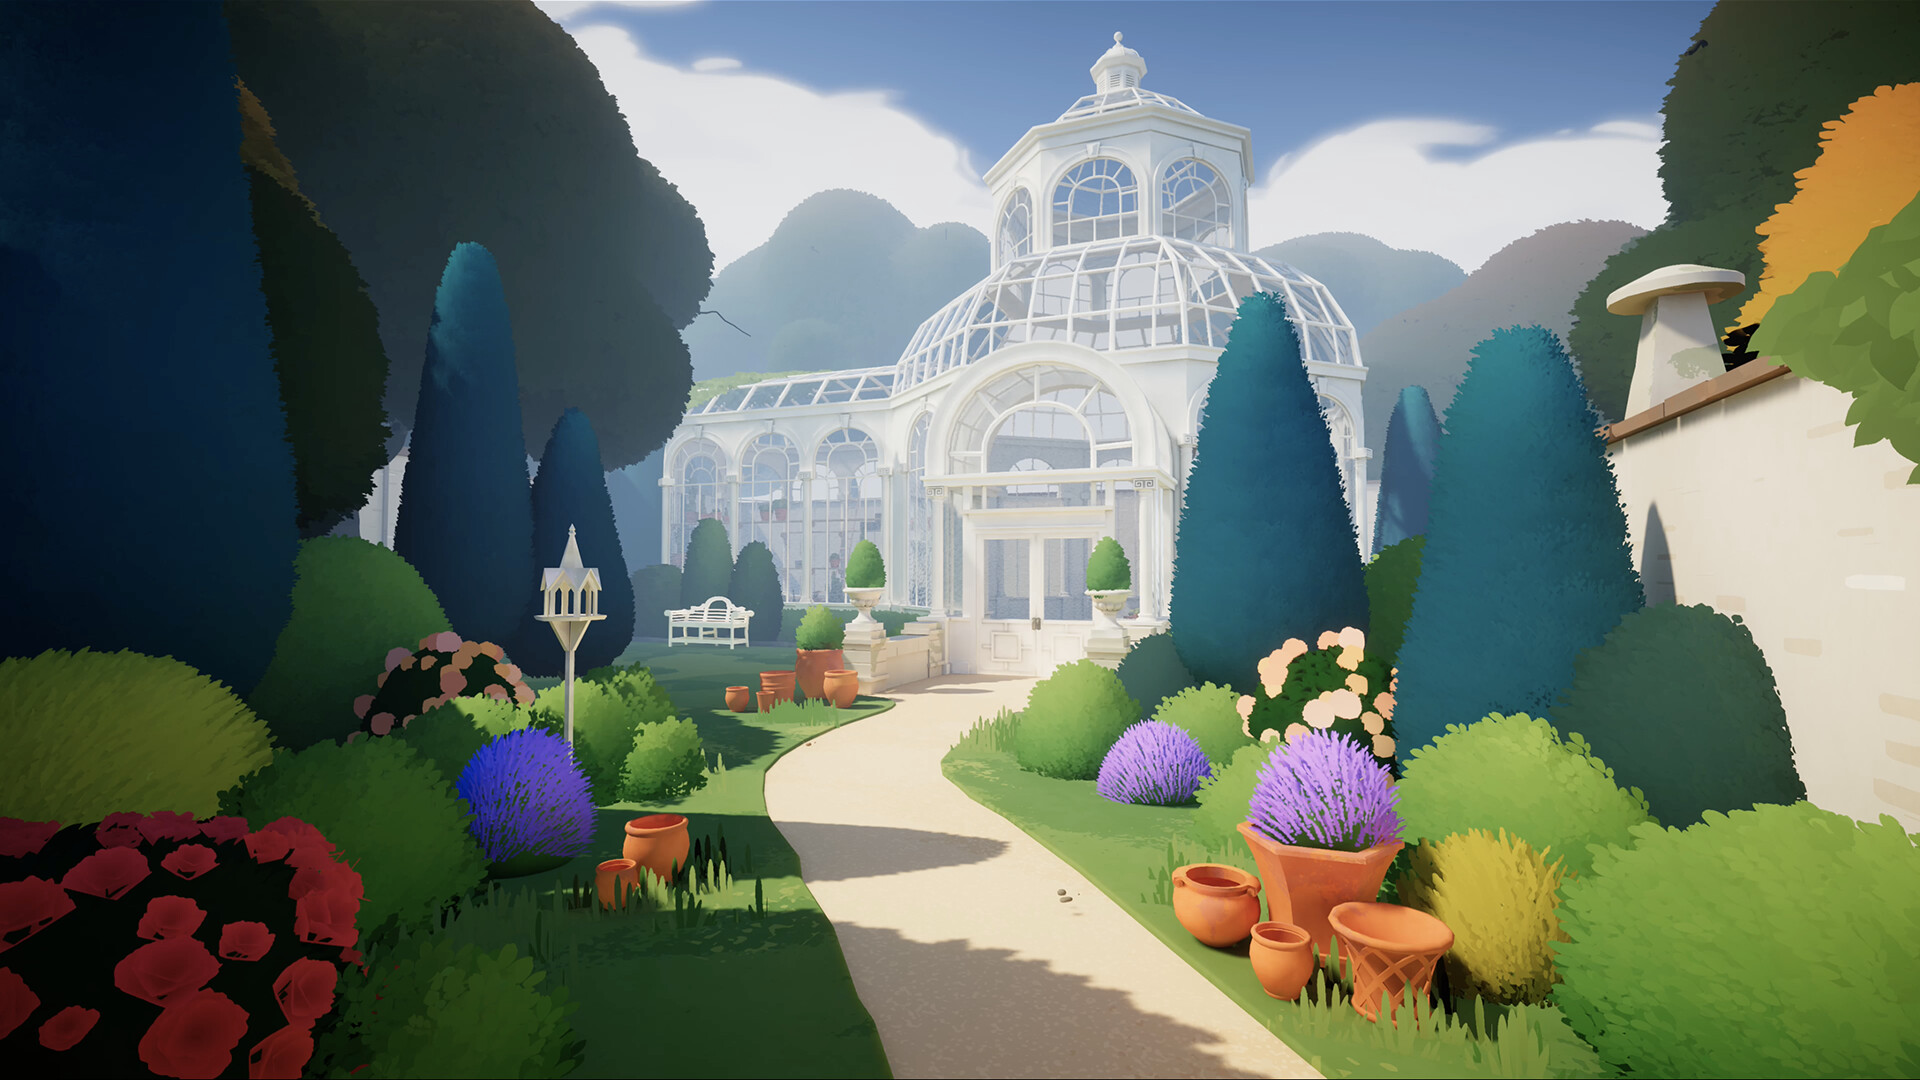 A screenshot from the game "Botany Manor:" a white greenhouse with glass walls at the end of a path lined with trees